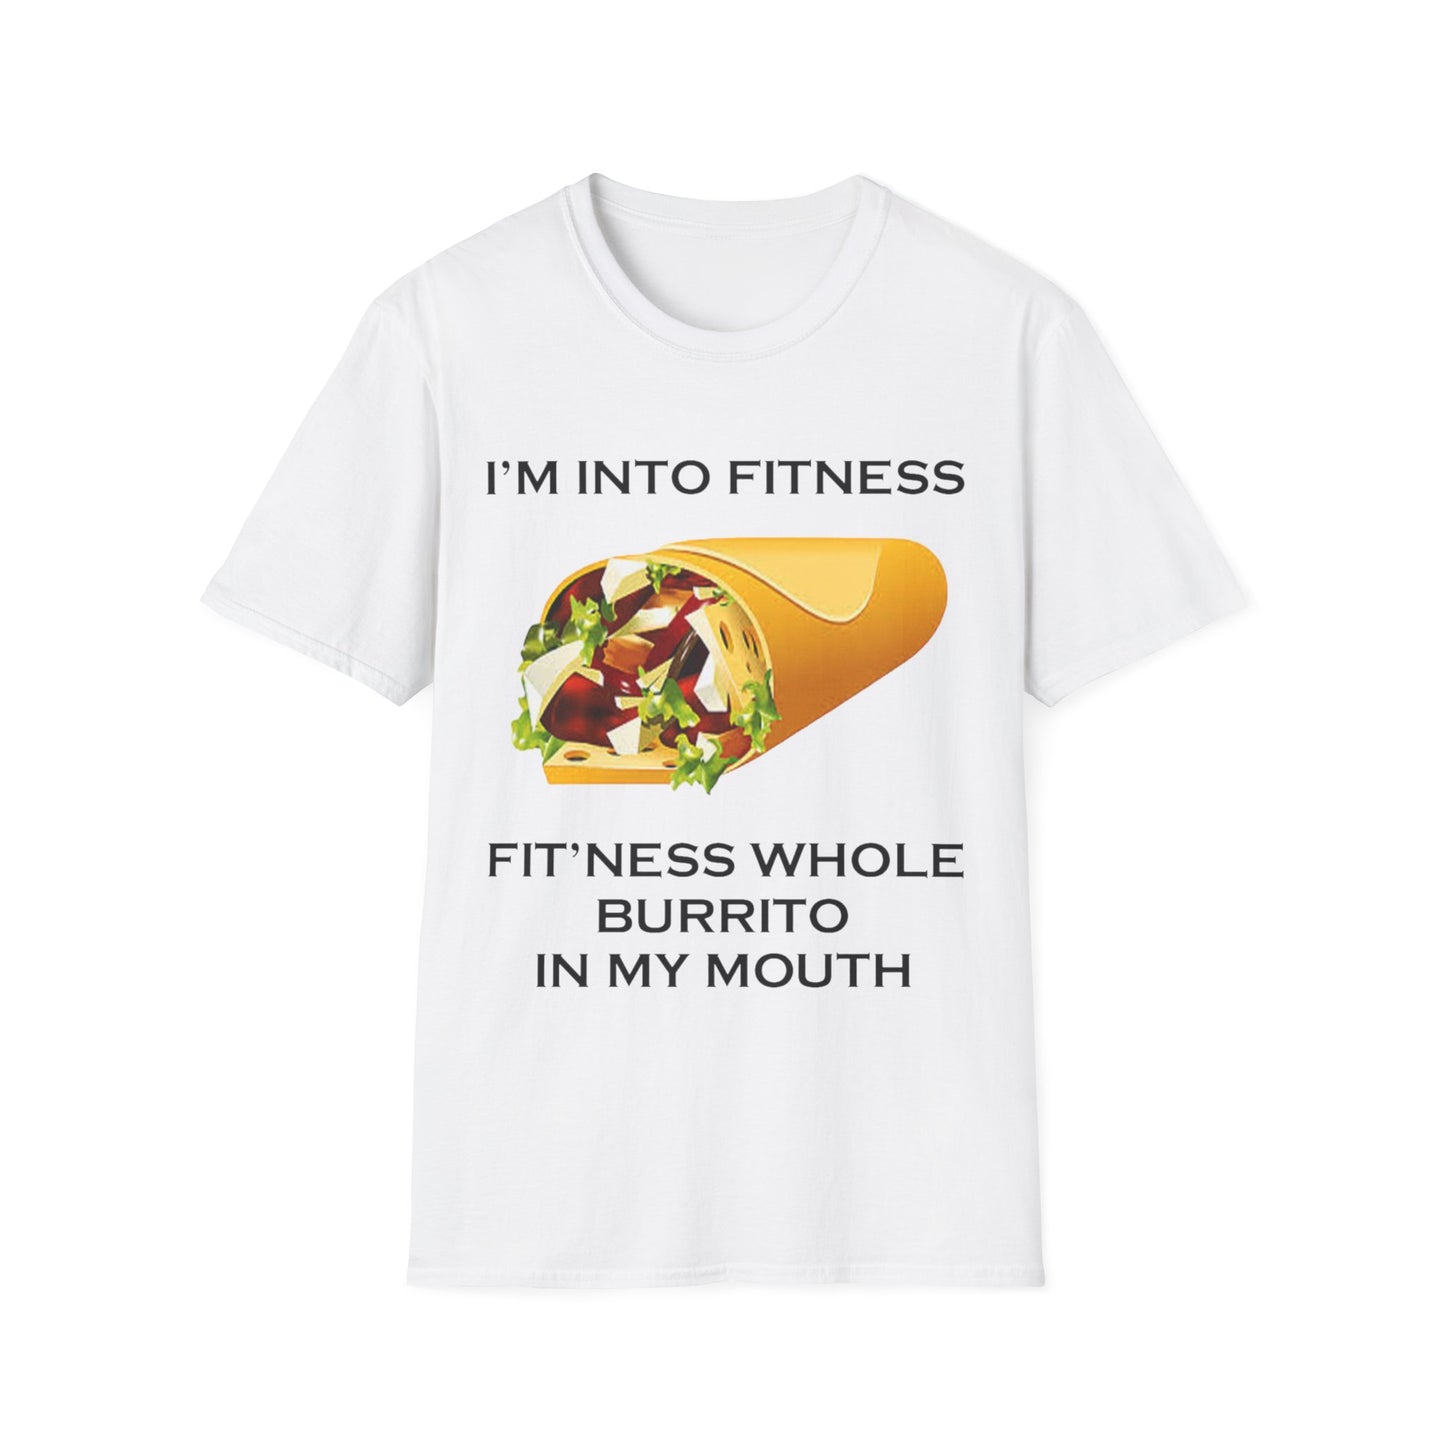 A white t-shirt with a design of a burrito and the funny quote: I'm Into fitness, Fit'ness Whole Burrito In My Mouth